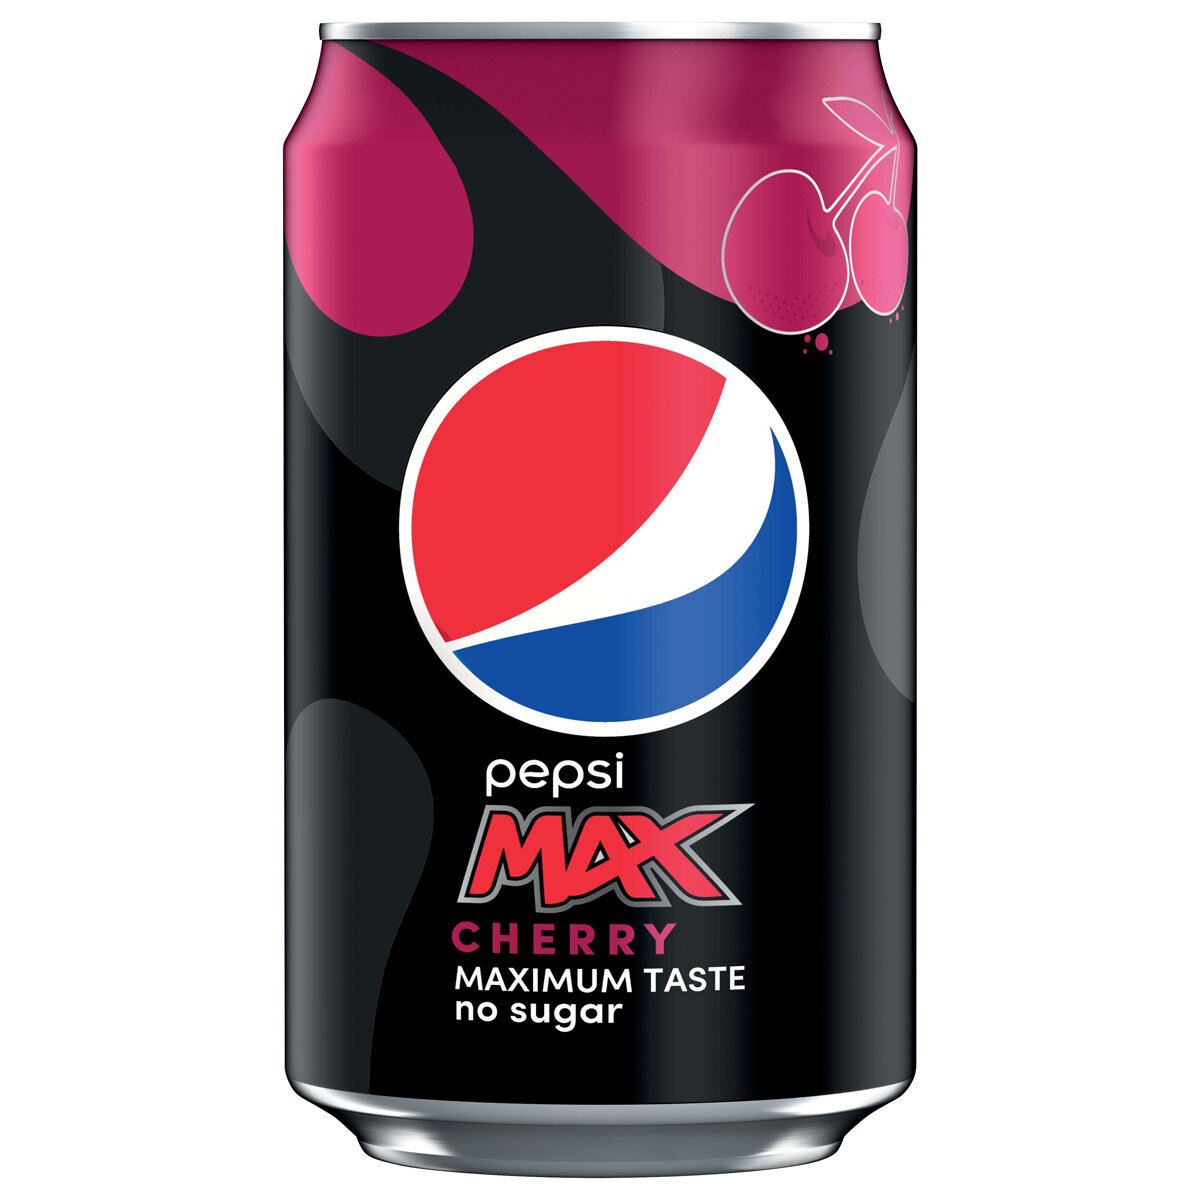 Cut out image of individual can on white background